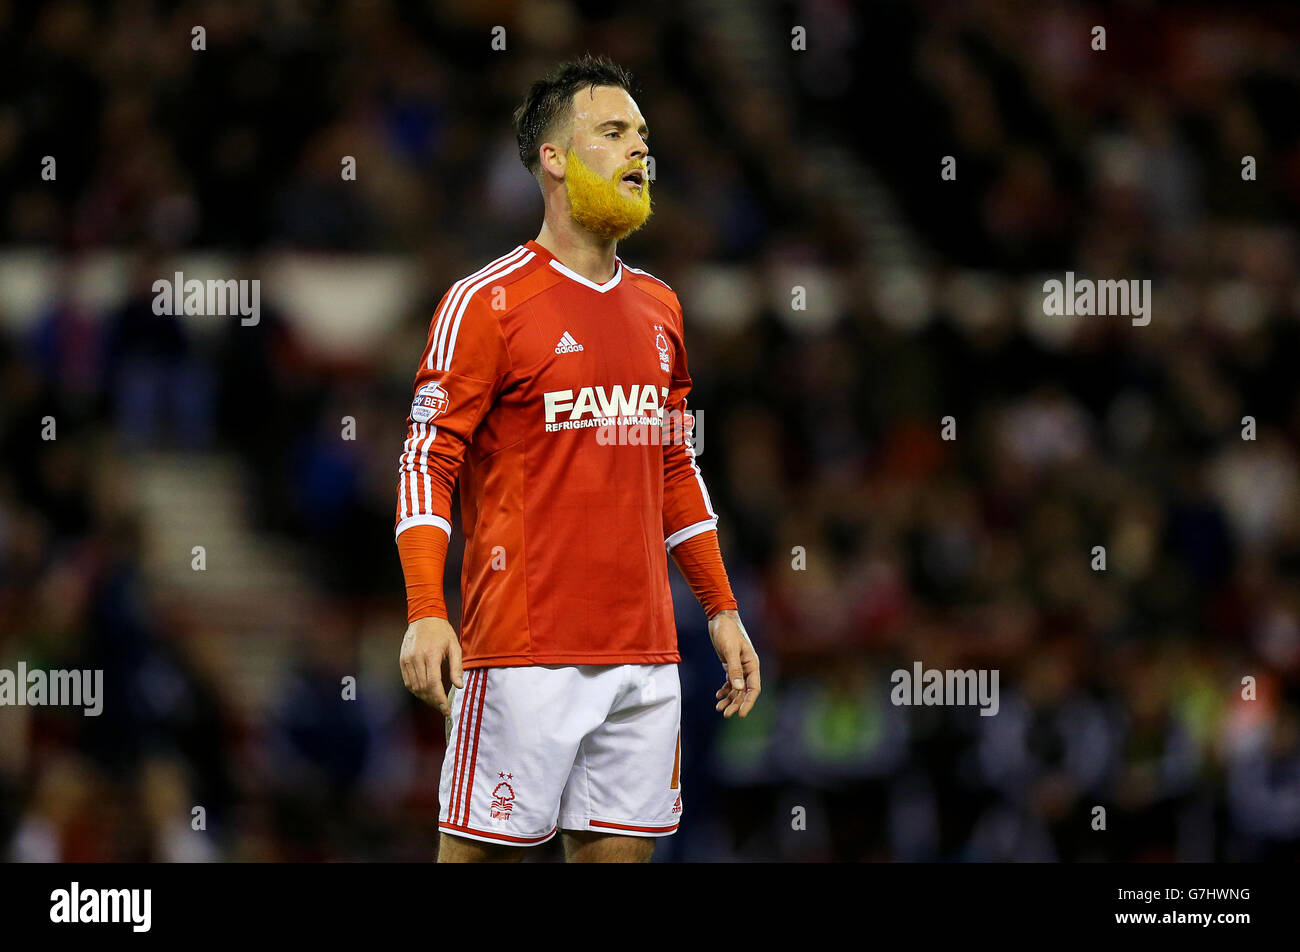 Nottingham Forest's Danny Fox with his beard dyed orange in order to raise awareness of the disease Cystic Fibrosis during the Sky Bet Championship match at the City Ground, Nottingham. Stock Photo